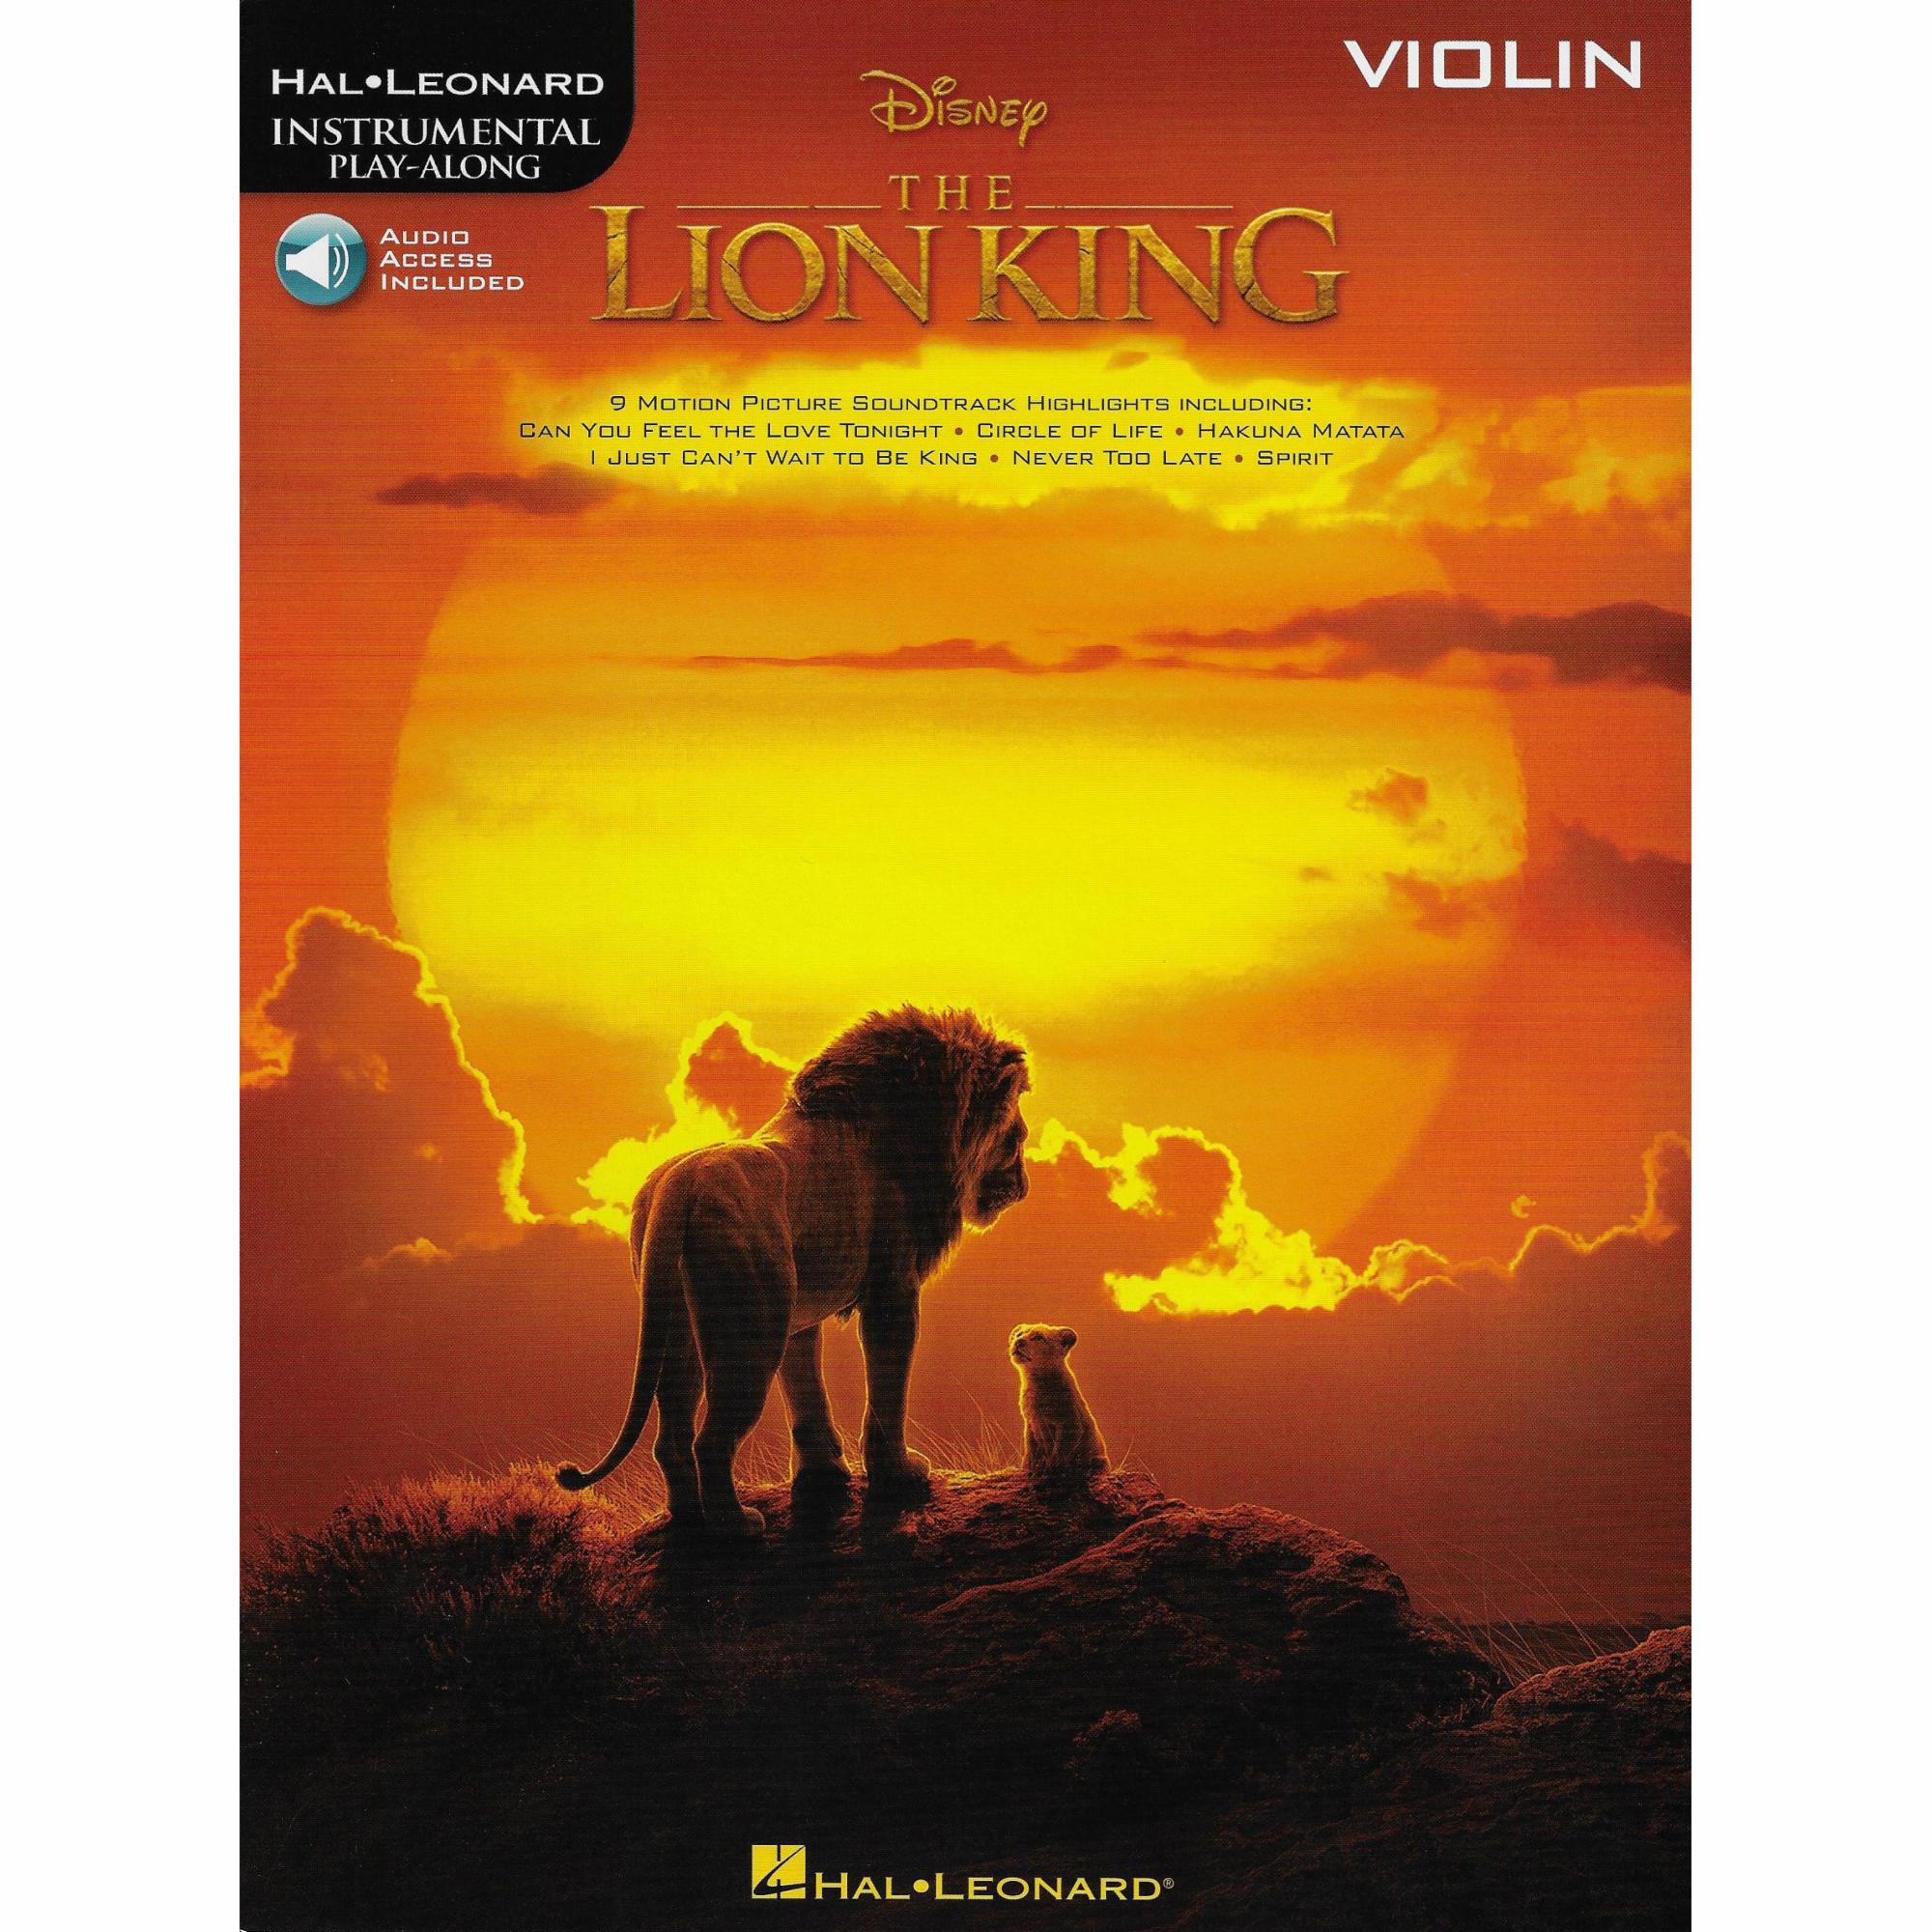 The Lion King for Violin, Viola, or Cello